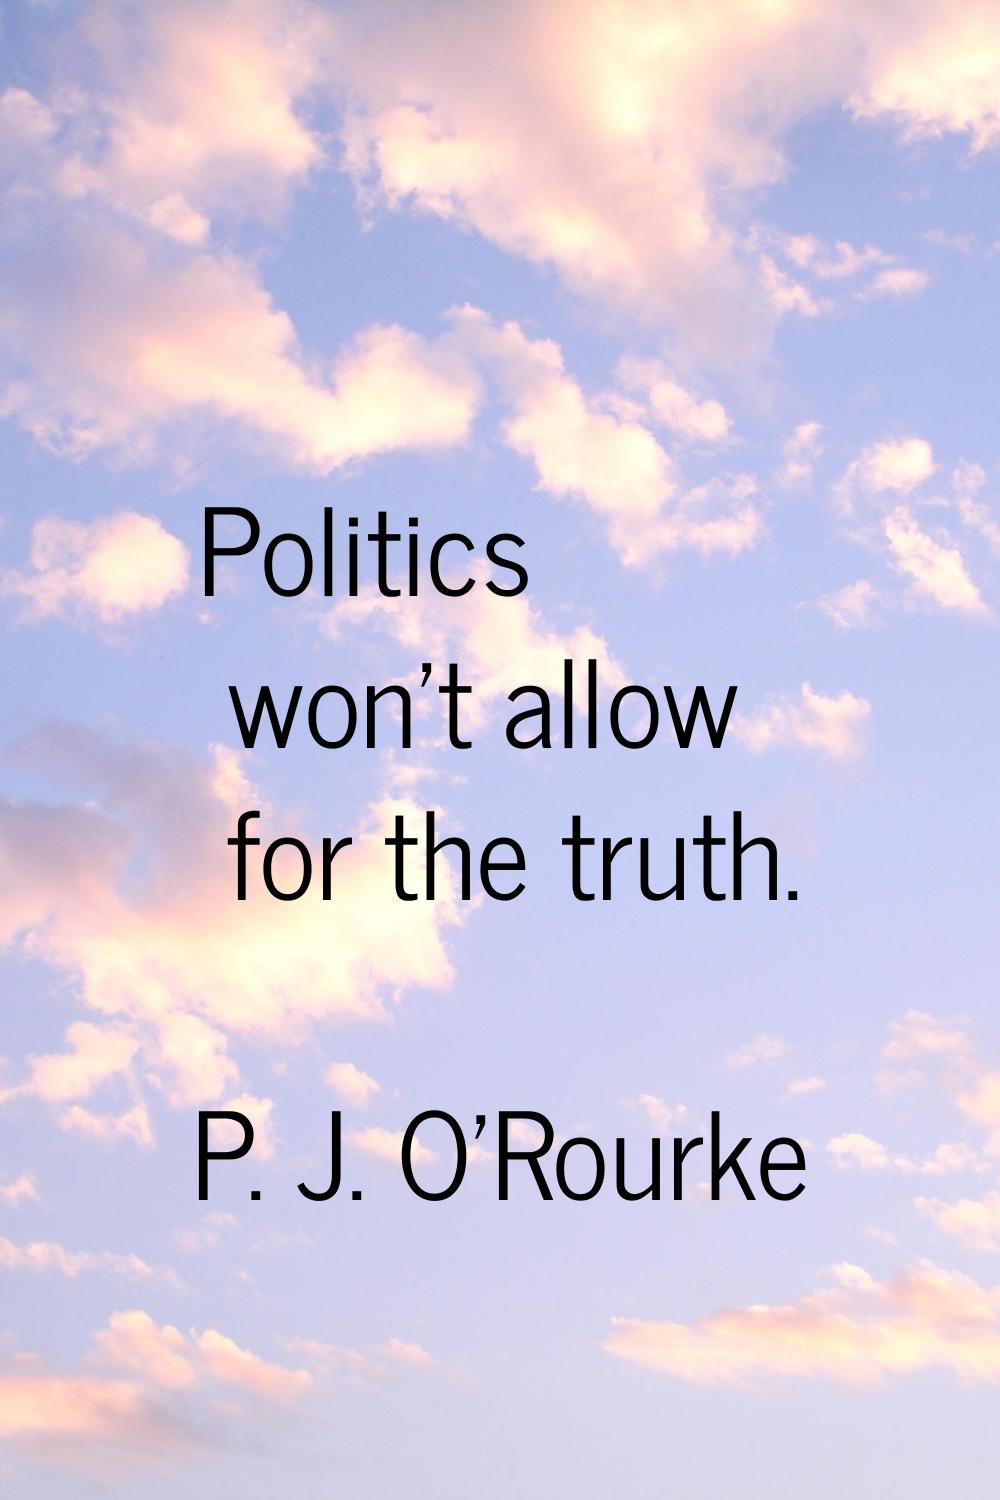 Politics won't allow for the truth.